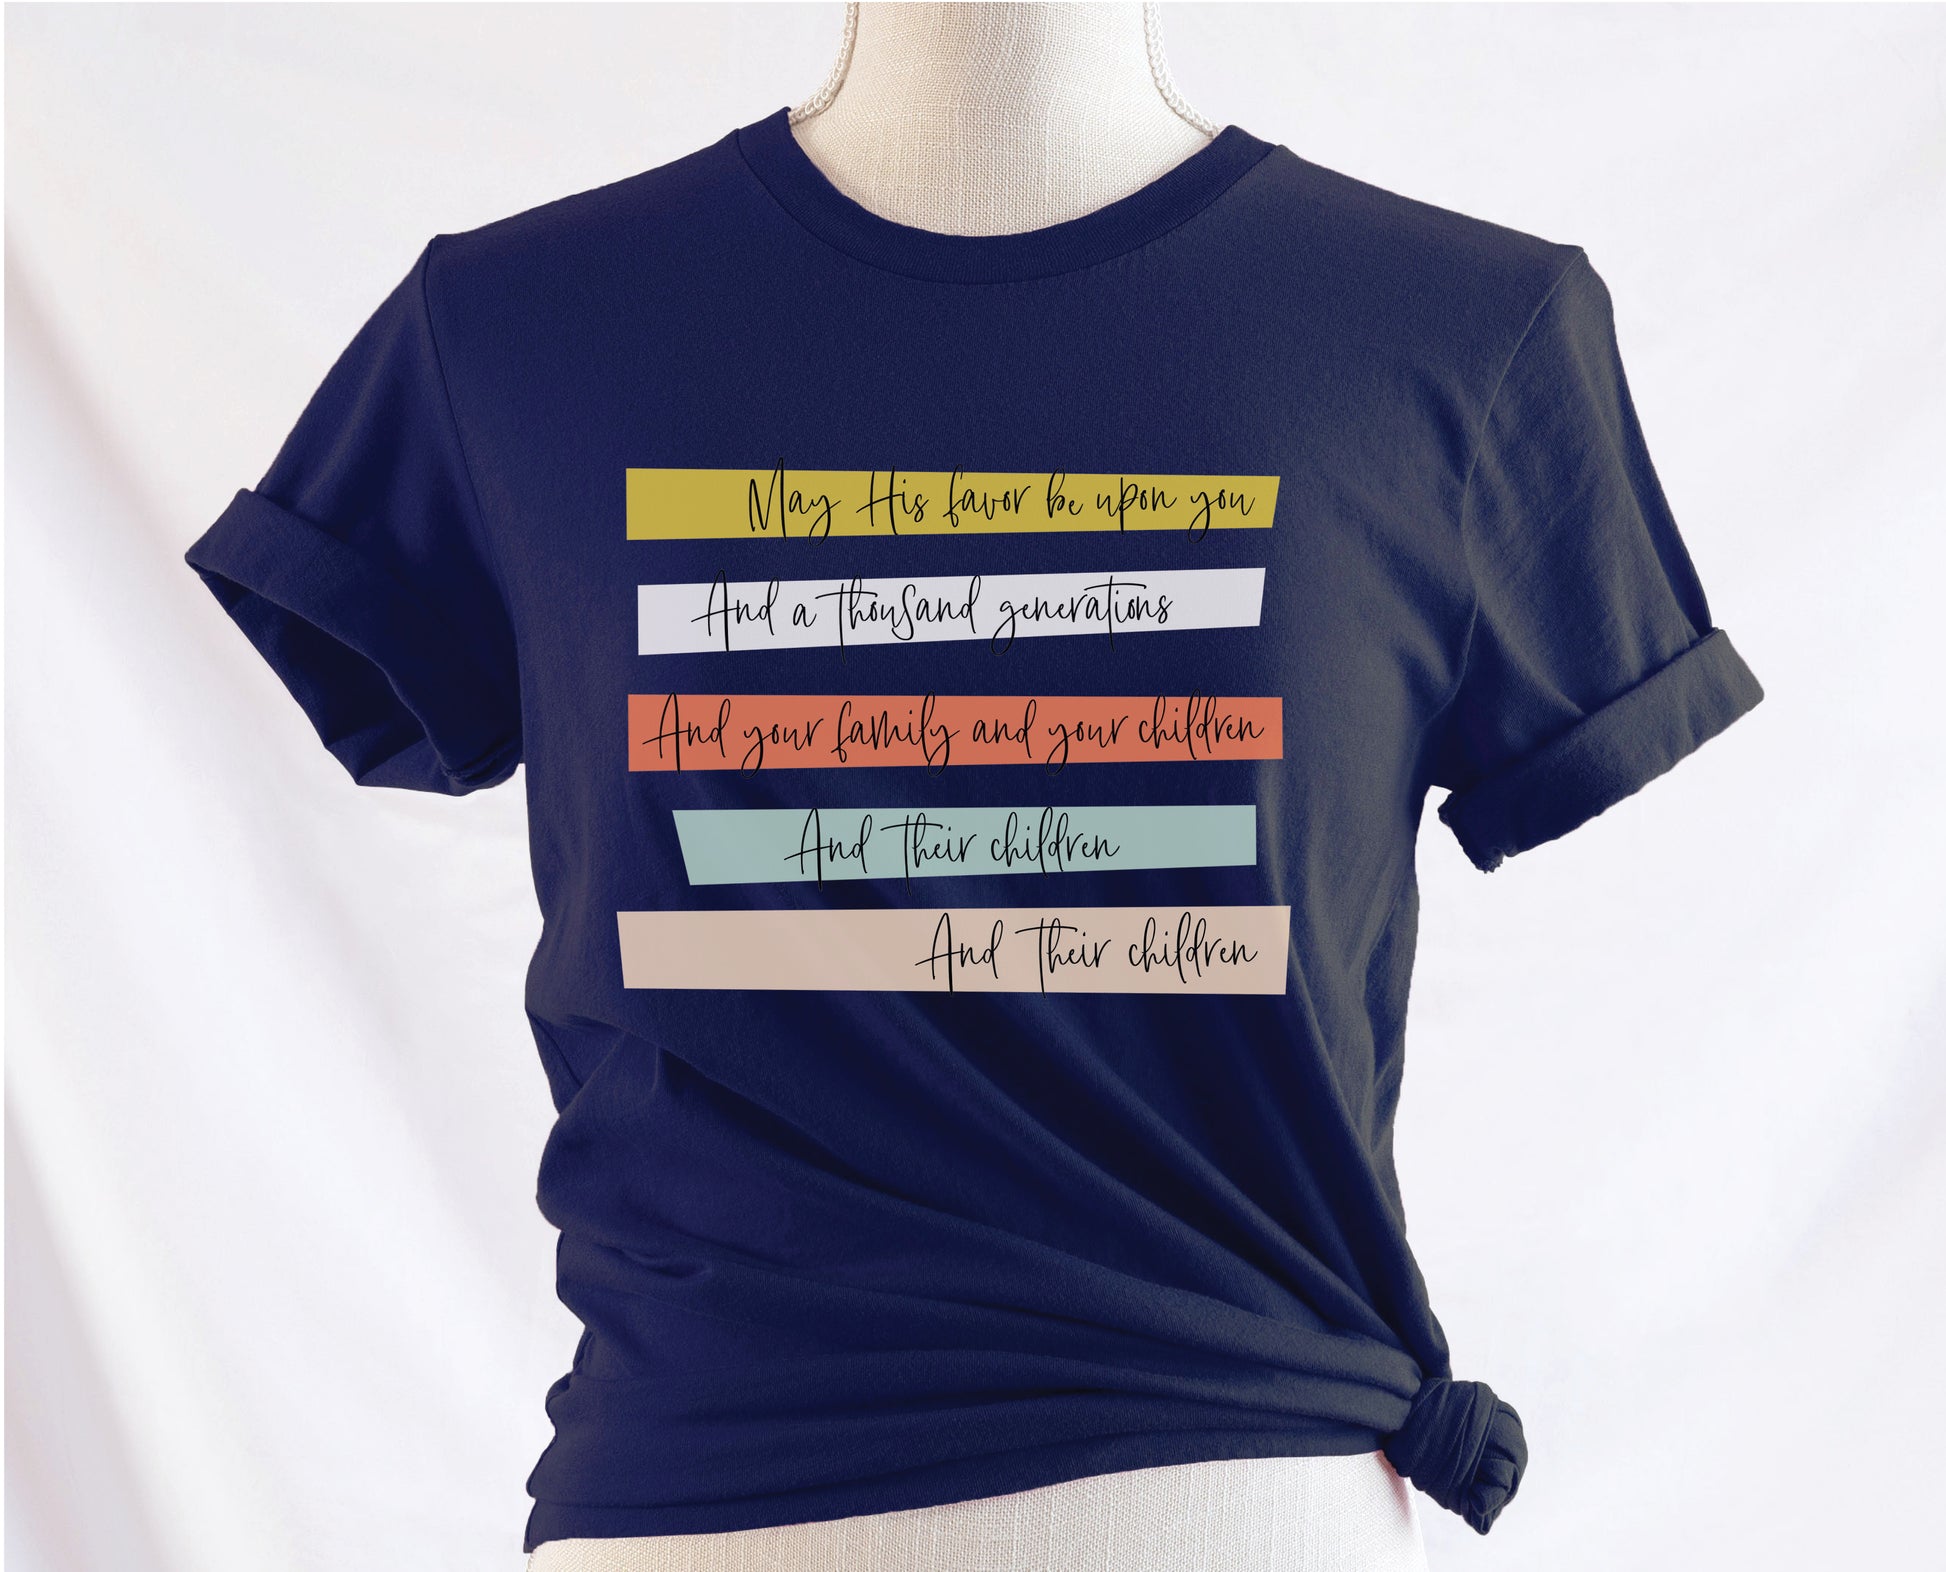 May His Favor Be Upon You and a thousand generations The Family and children Blessing Christian aesthetic 5 bars design printed on soft navy blue t-shirt for women